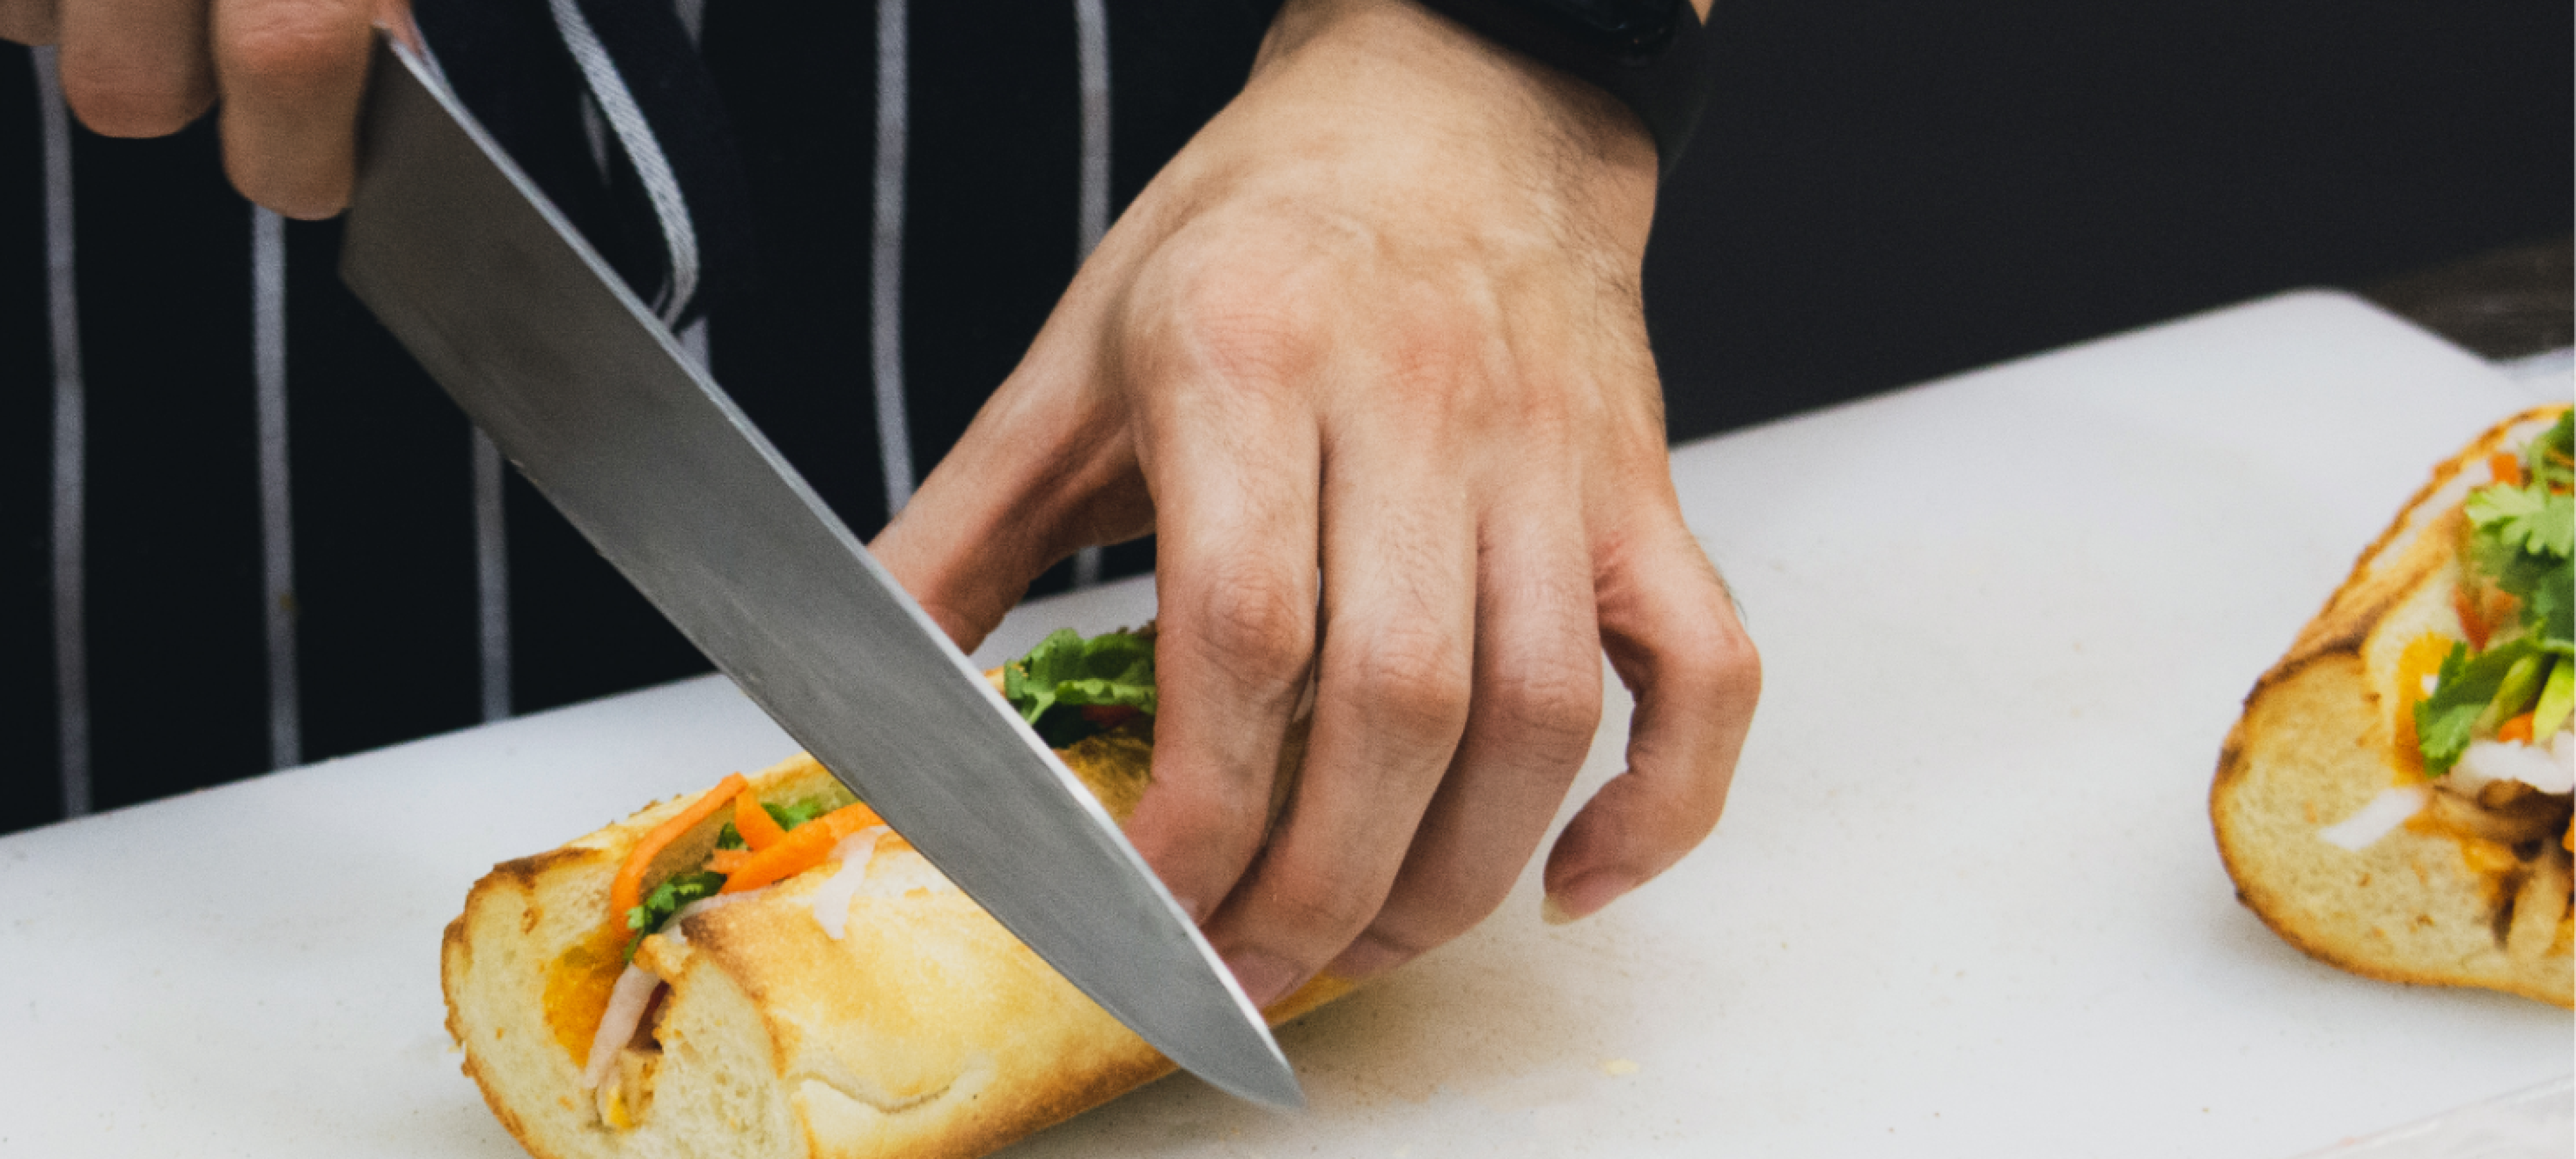 10 Best Knives to Cut Sushi Rolls